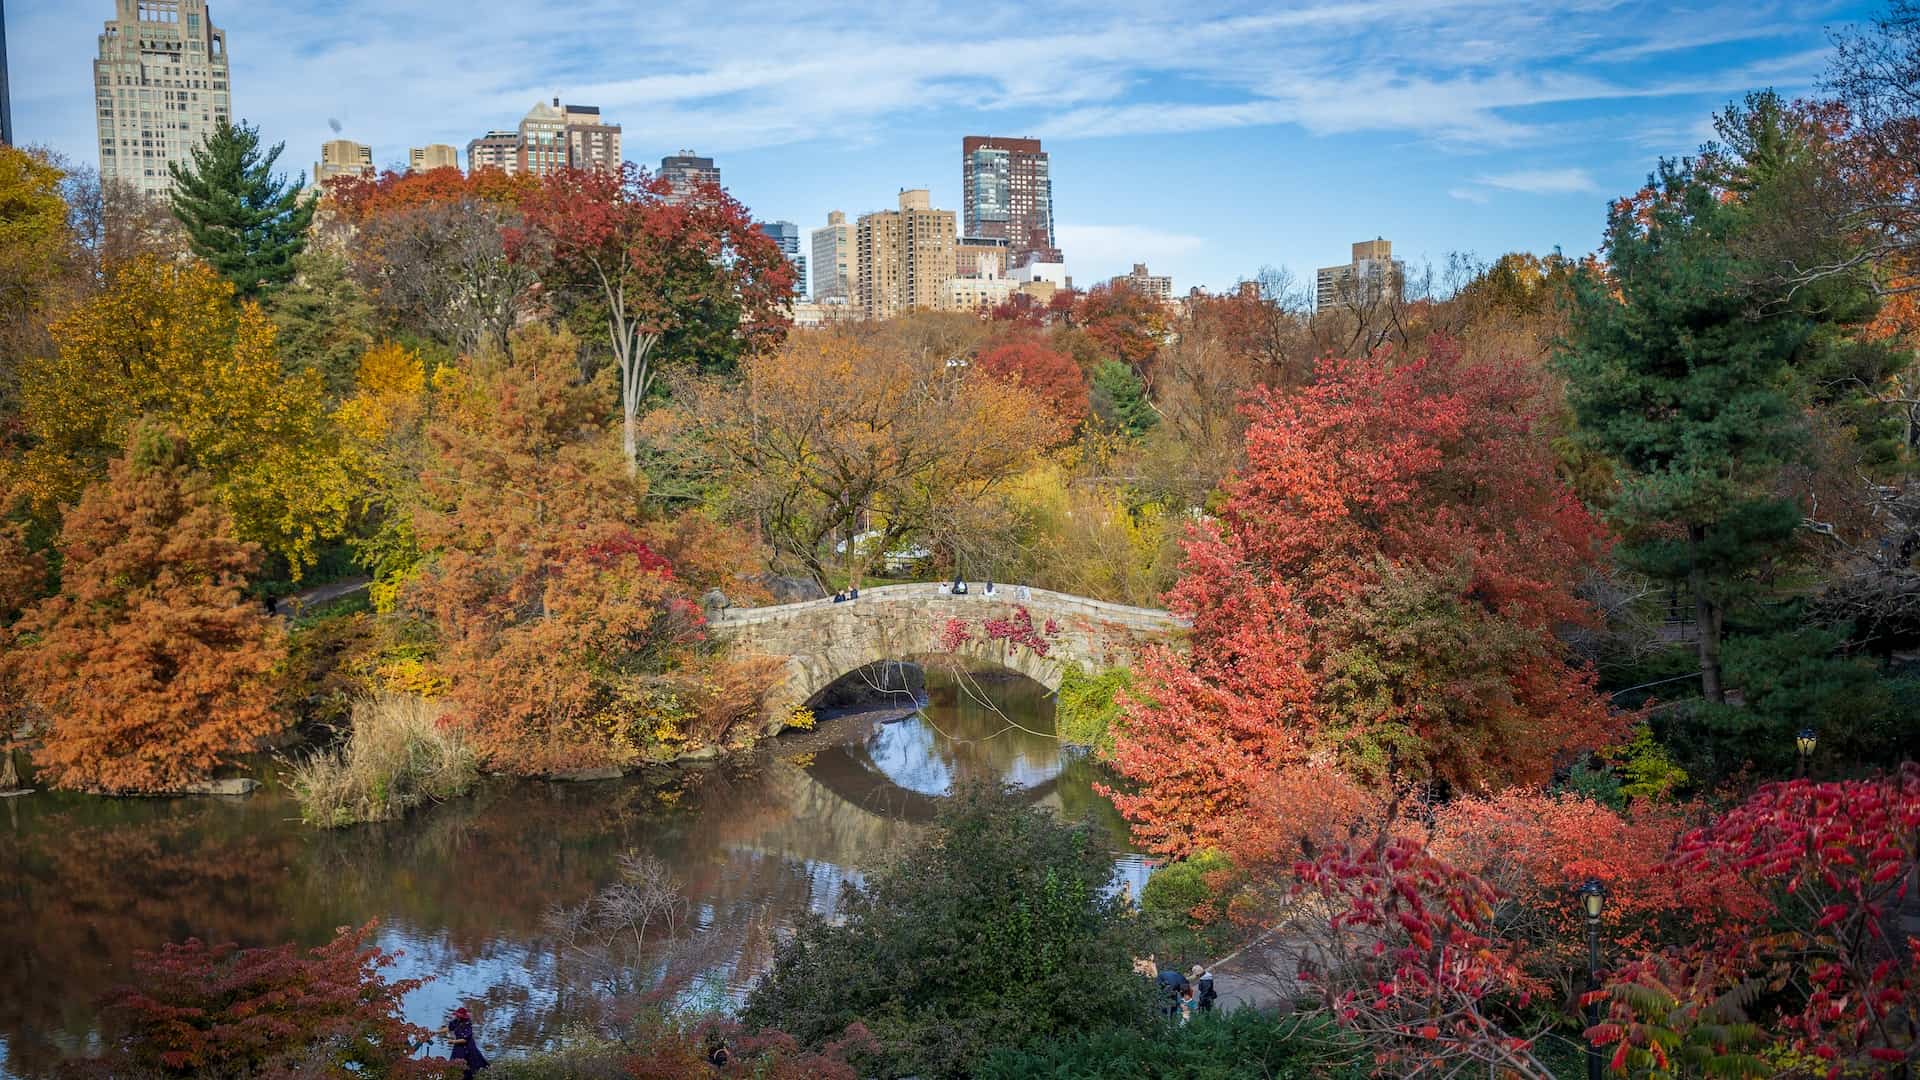 New York City in October 51+ Exciting, Fun, and Spooky Things to Do in